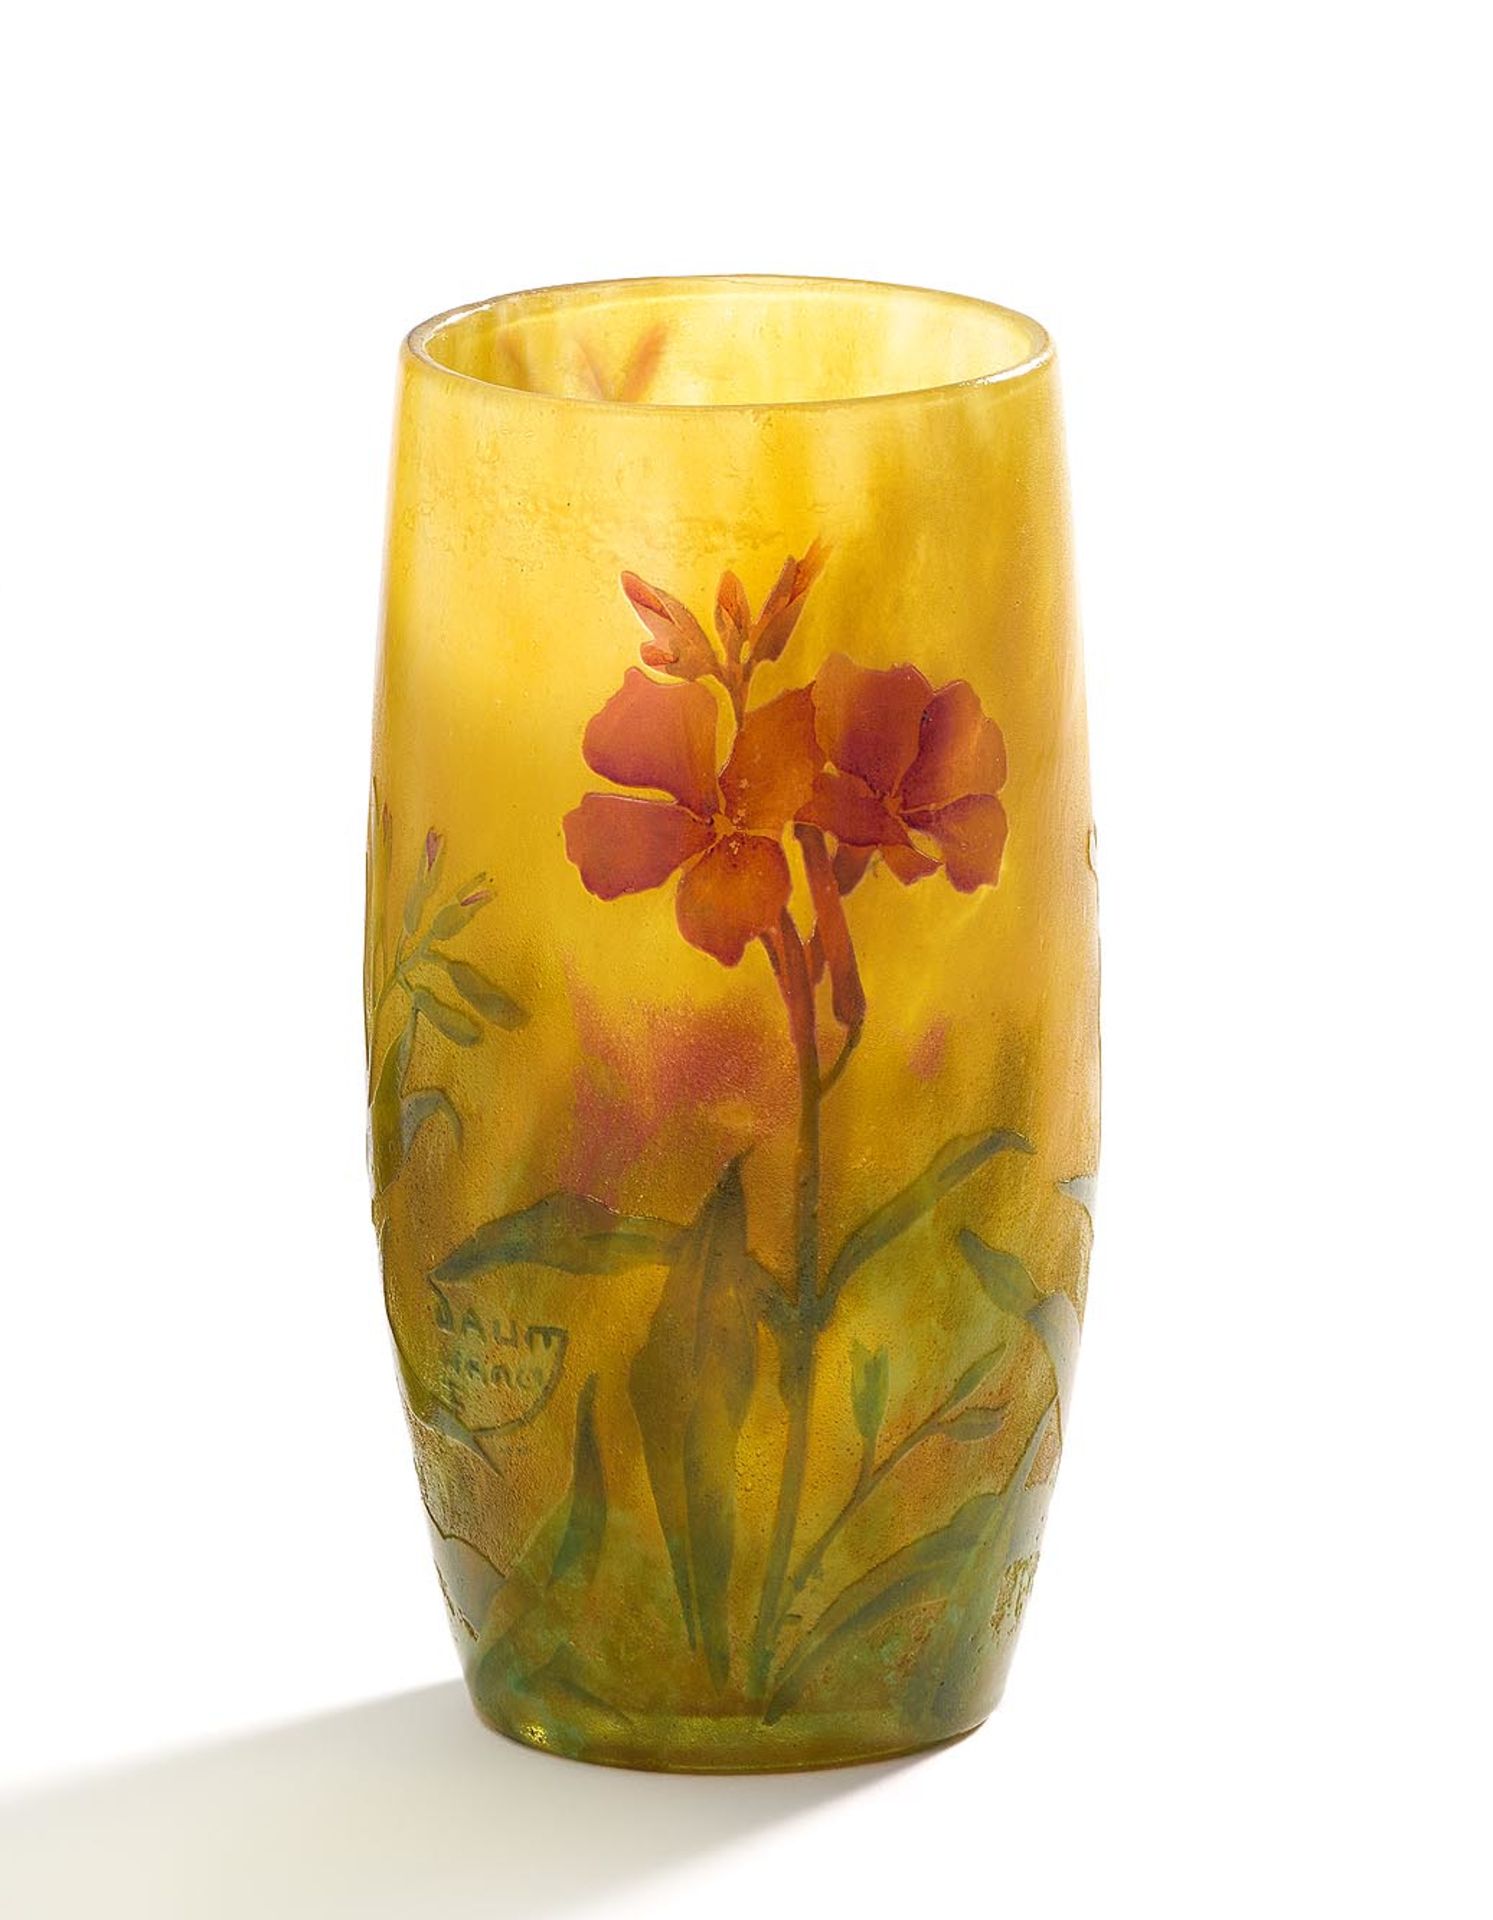 Daum Frères: SMALL GLASS VASE WITH FLOWER DECOR